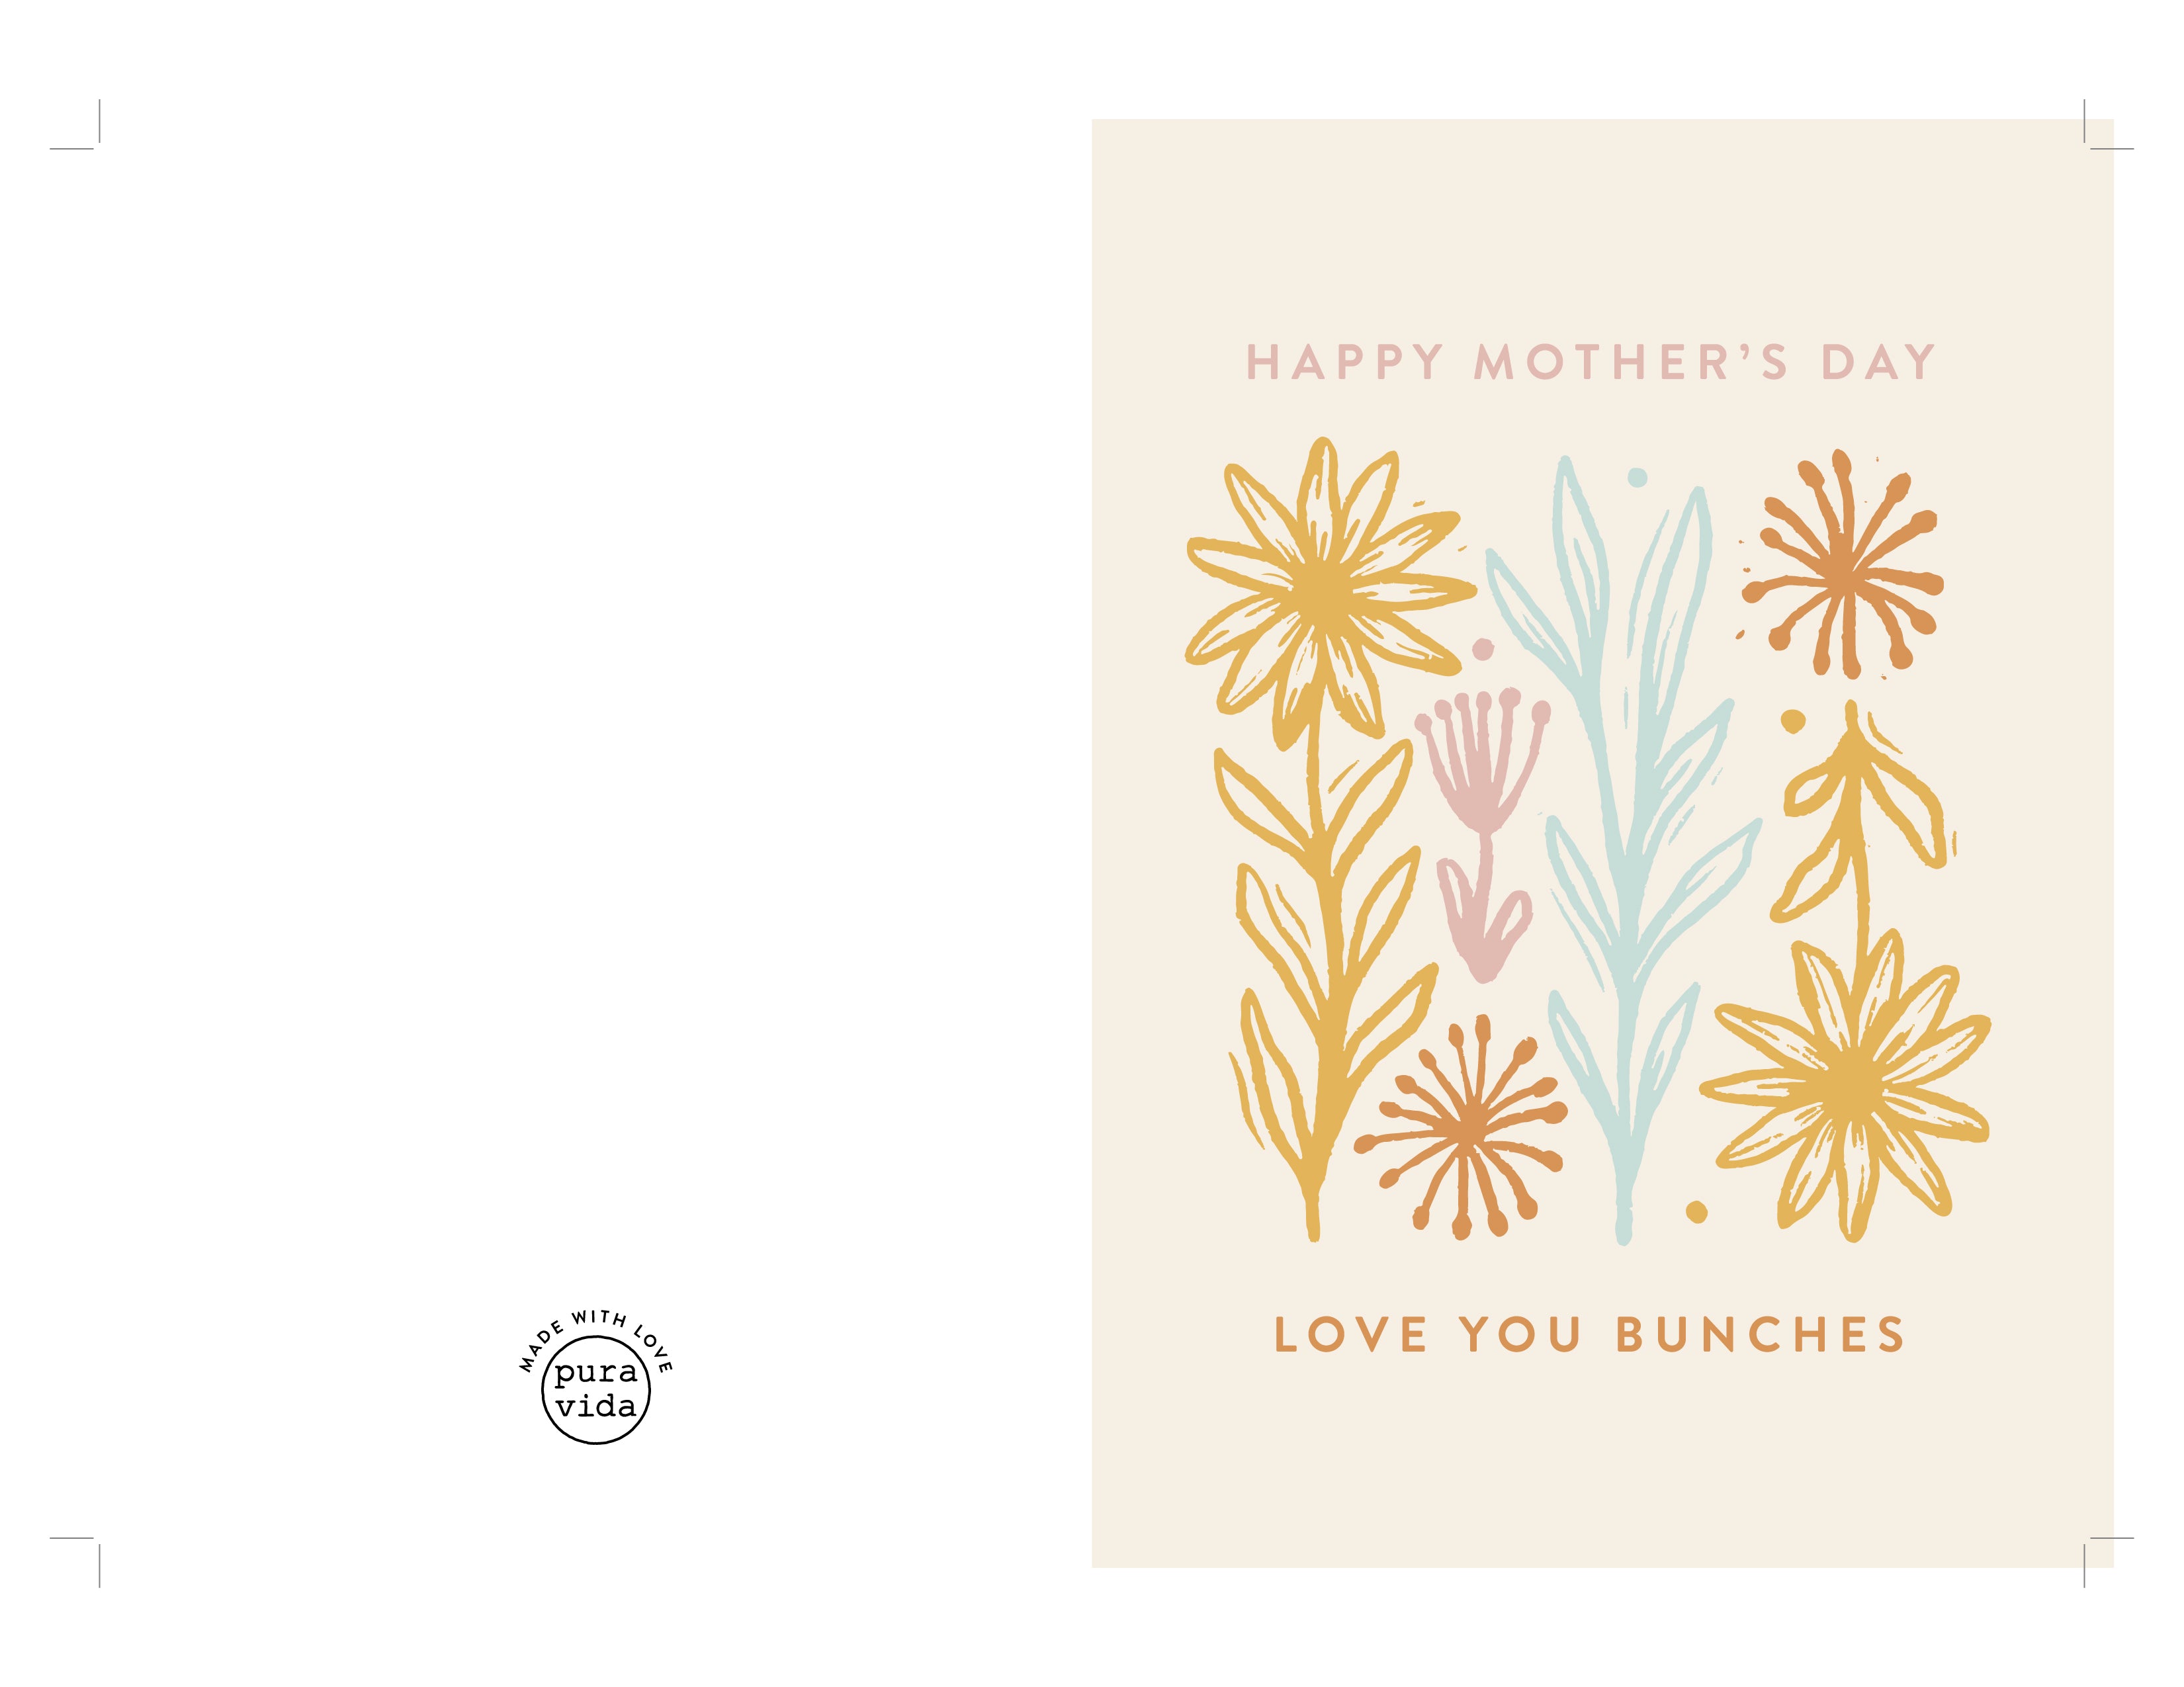  PV Blog 2021 Mother's Day Cards - Love You Bunches